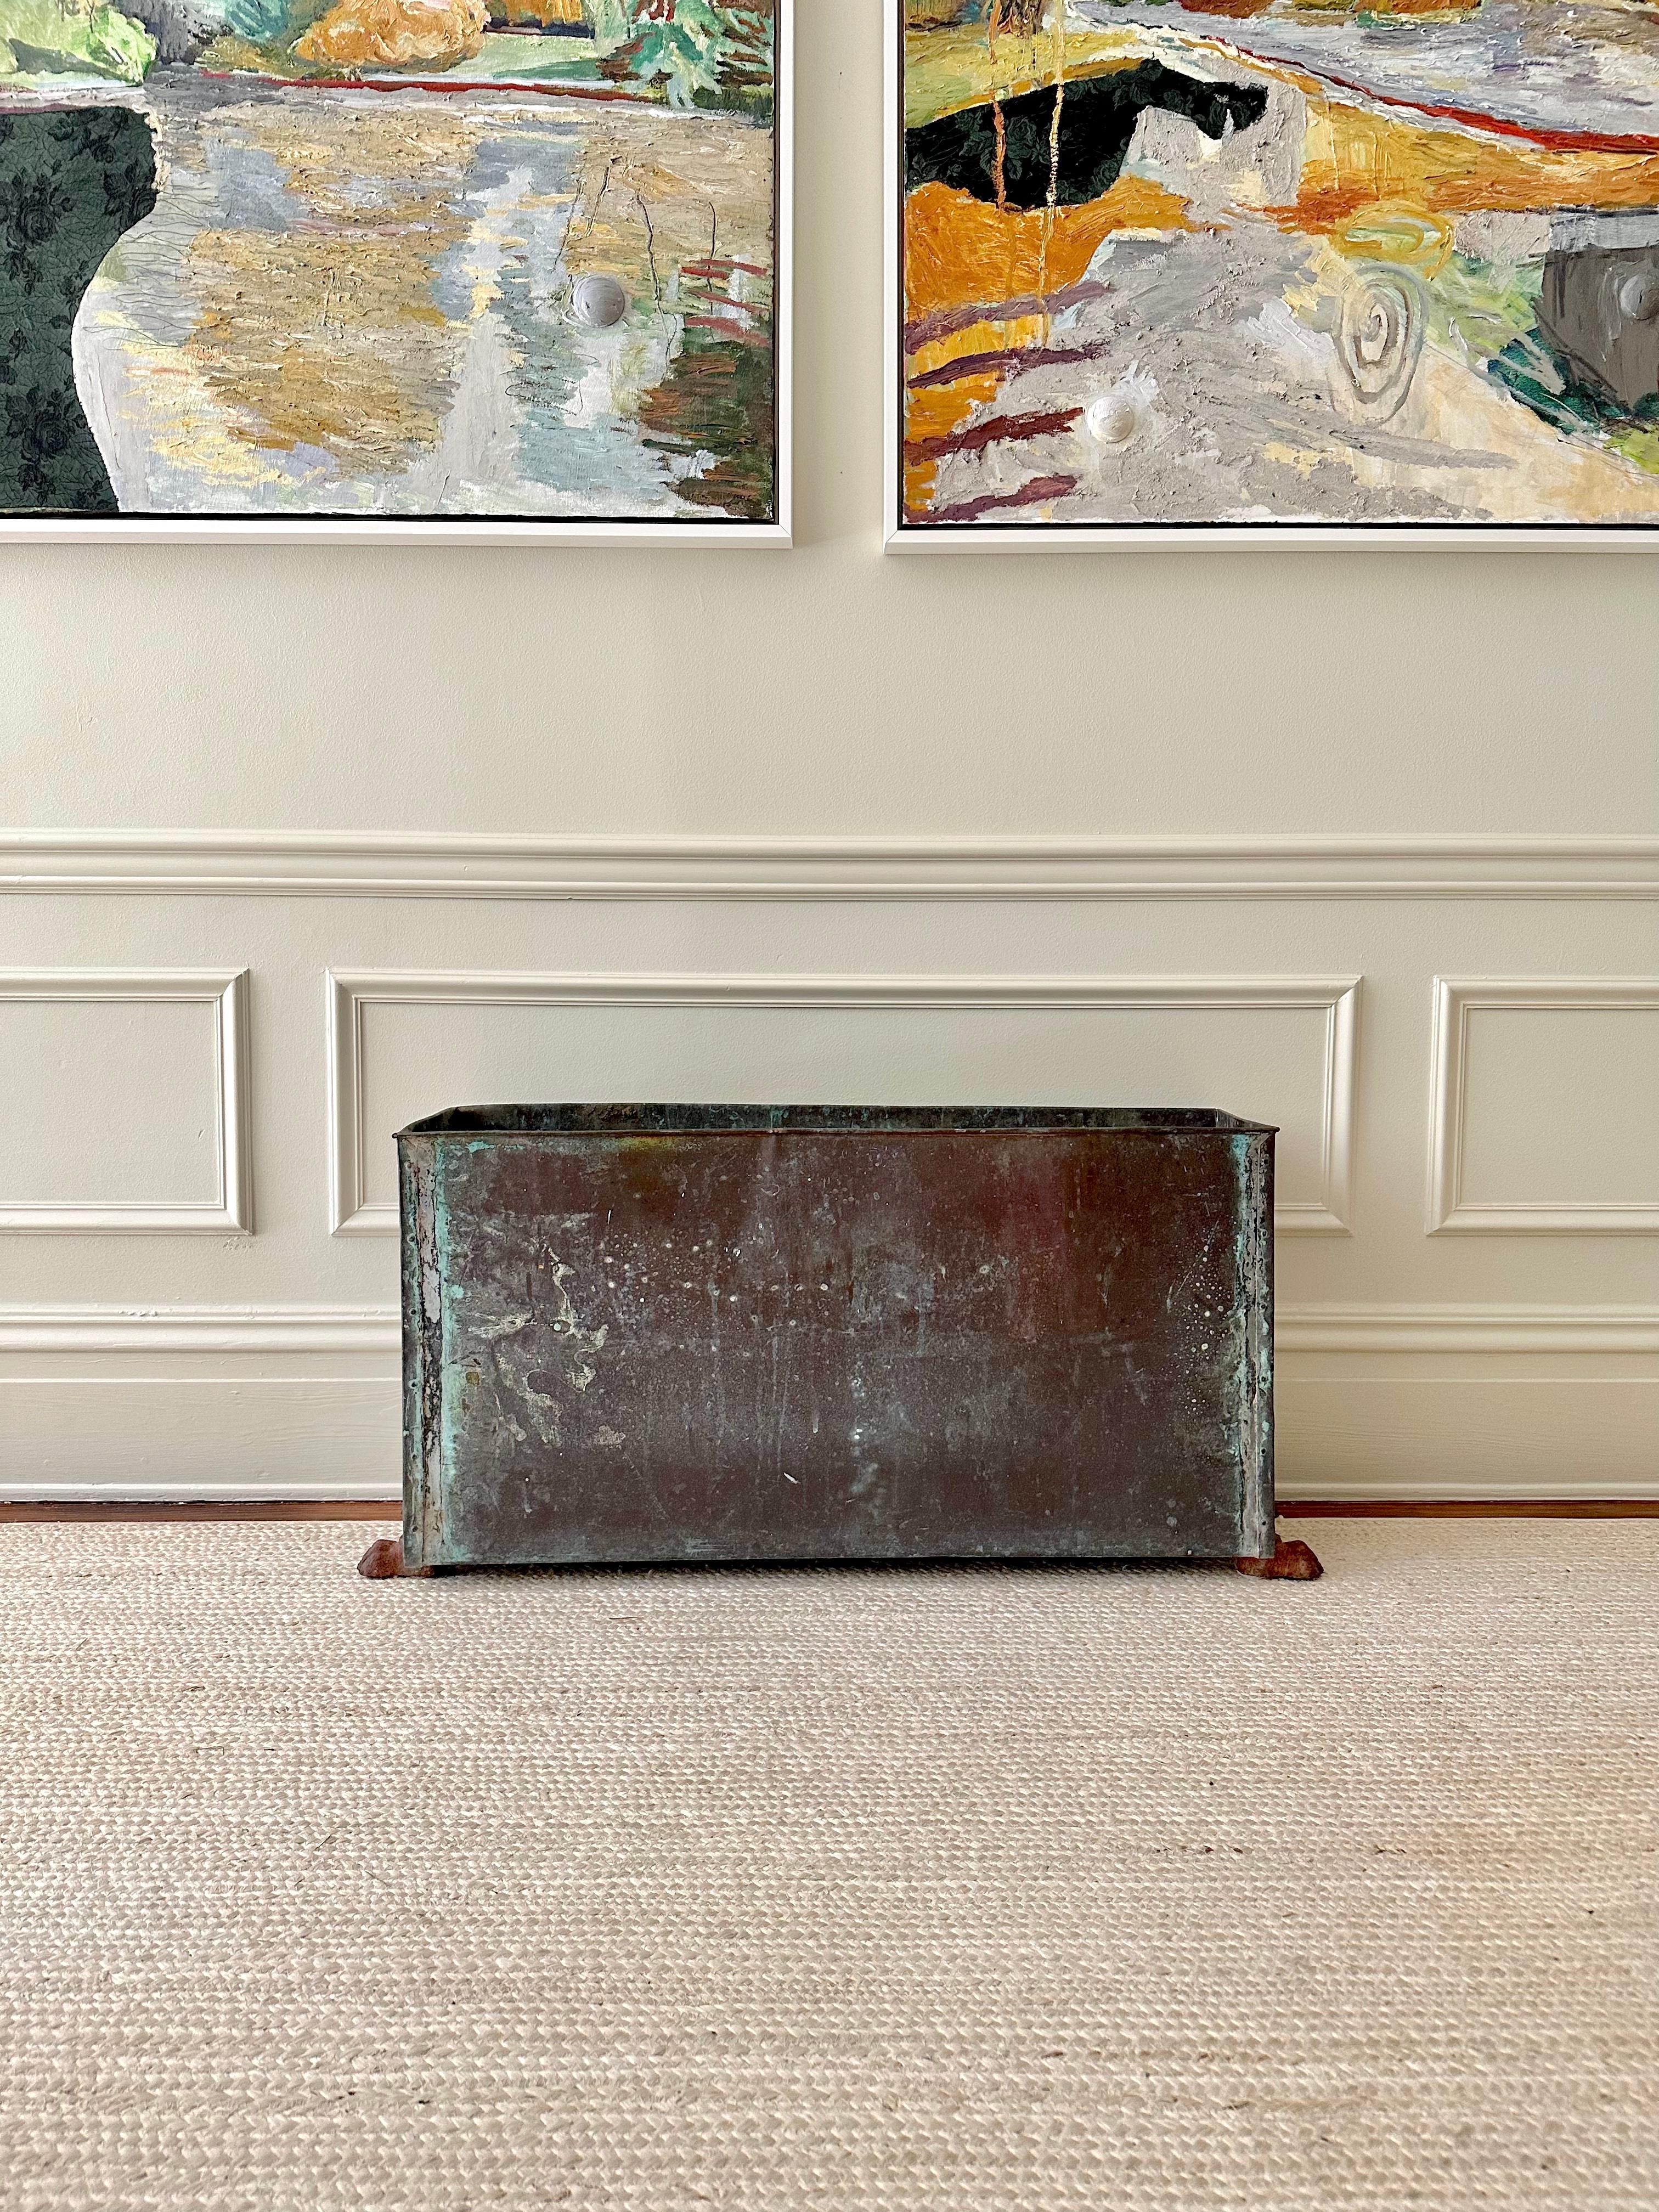 An elegant artisan-made example of an early 20th century copper garden planter with a hand rolled top edge and beautiful, time-worn verdigris patina.  I love this piece in a window or in an entryway under a remarkable piece of art.

Planters like